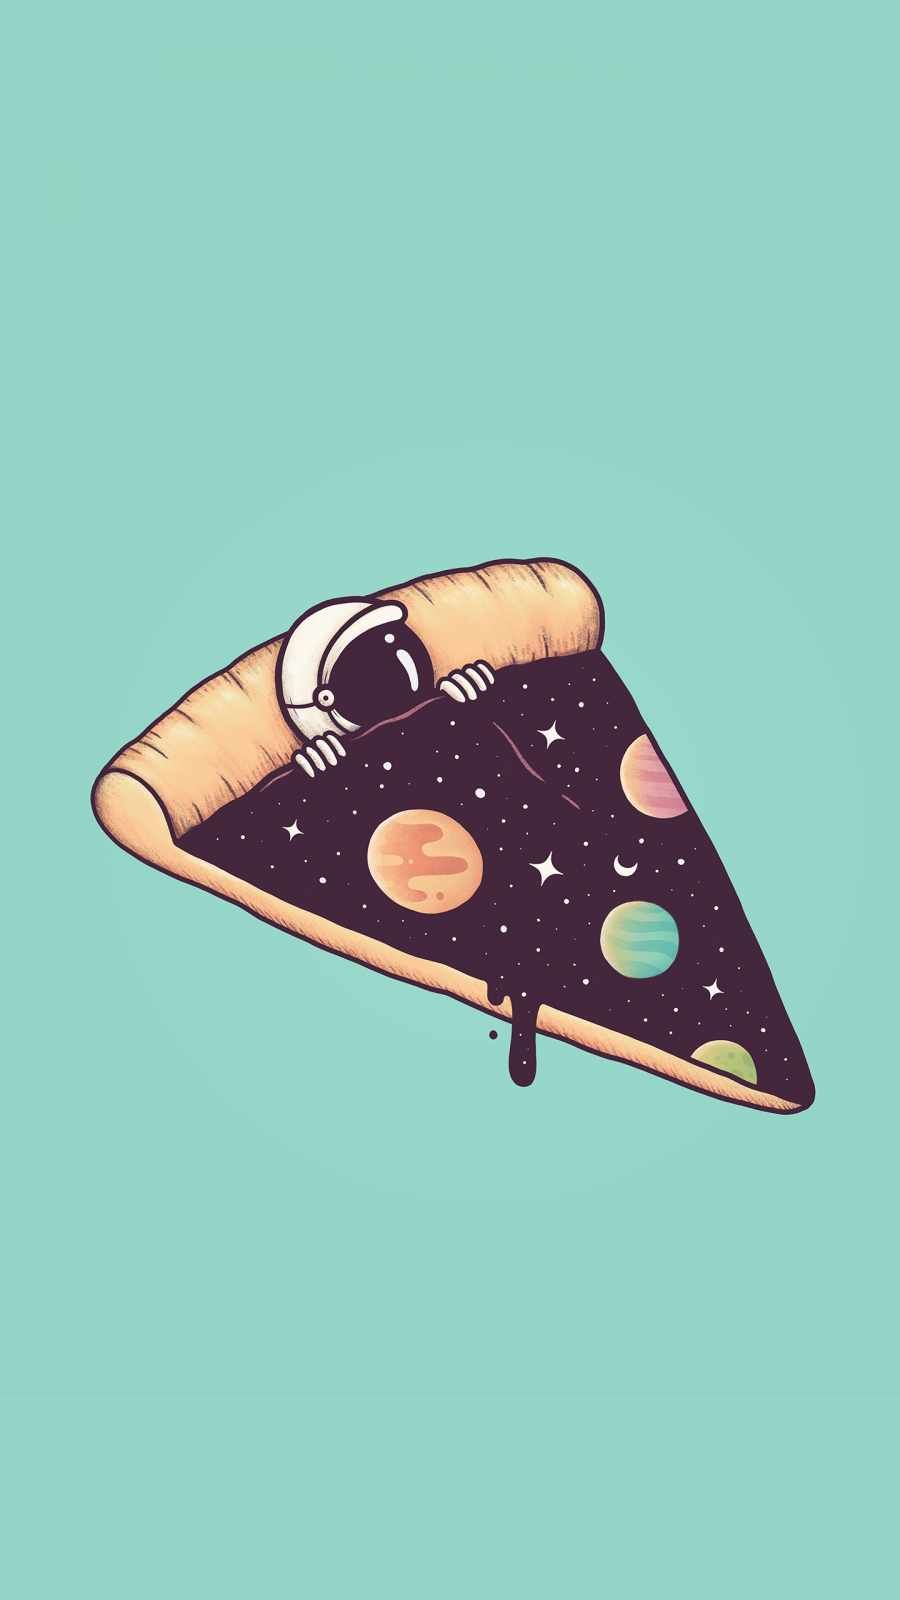 IPhone wallpaper of a slice of pizza with an astronaut on it - Pizza